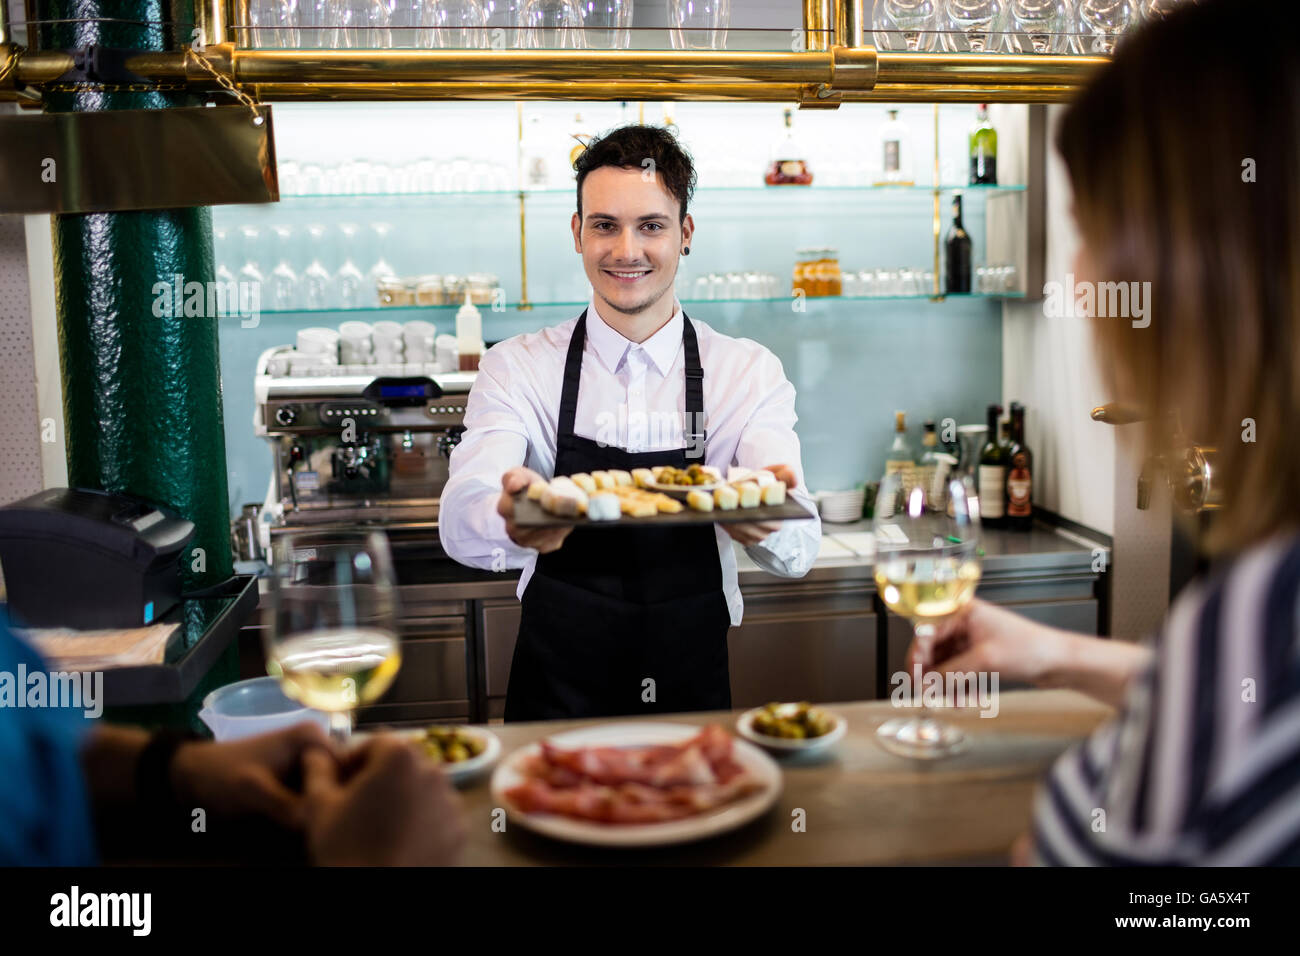 Young bartender serving food to customers at counter Stock Photo